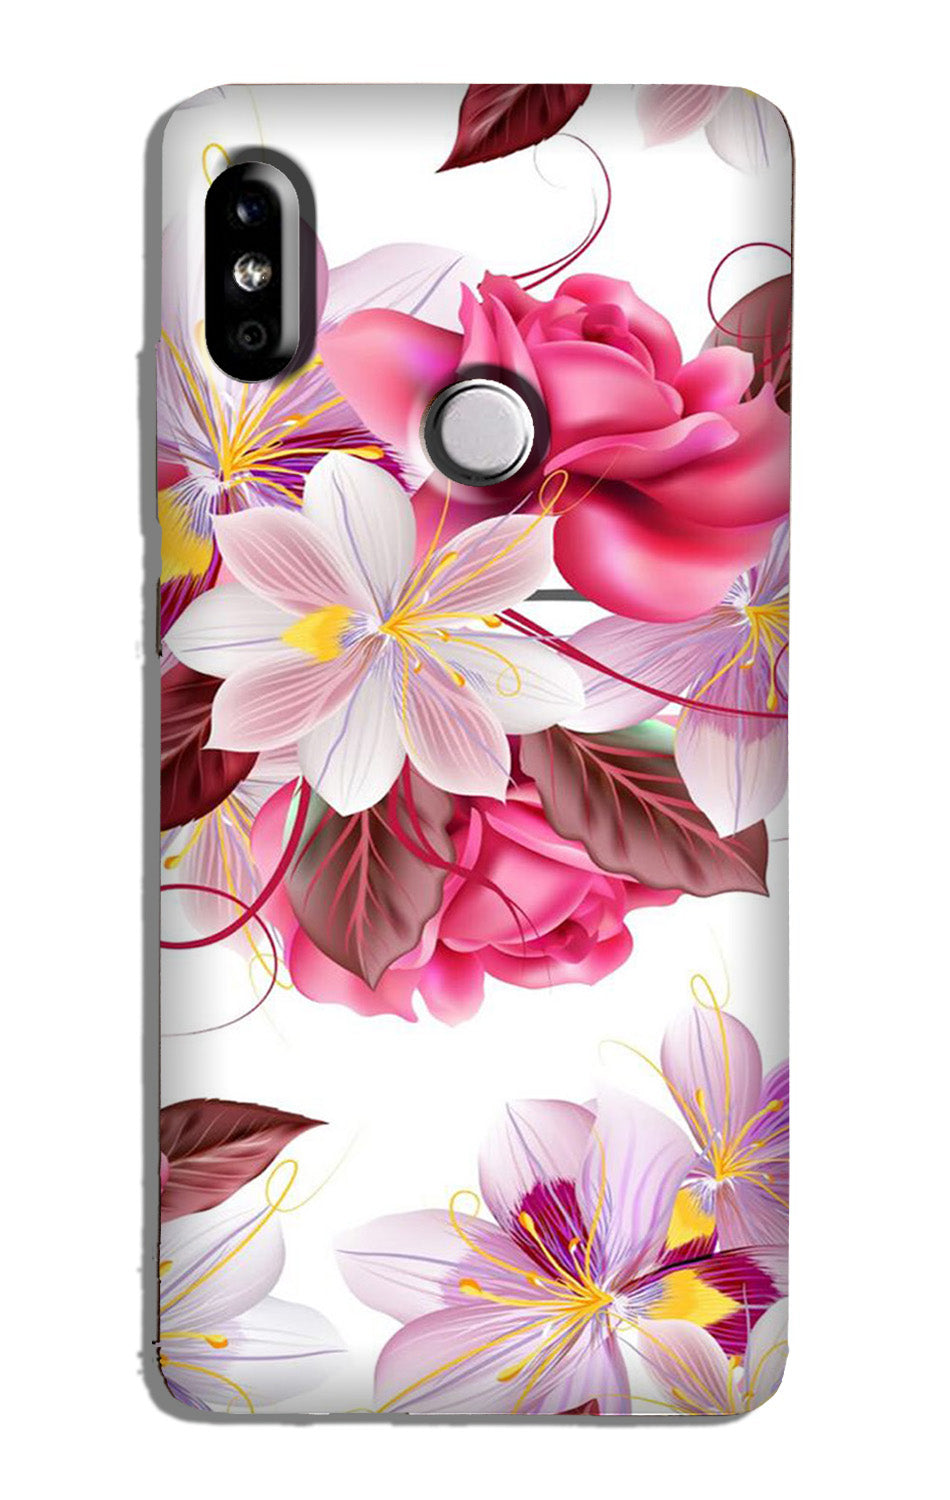 Beautiful flowers Case for Redmi Note 6 Pro